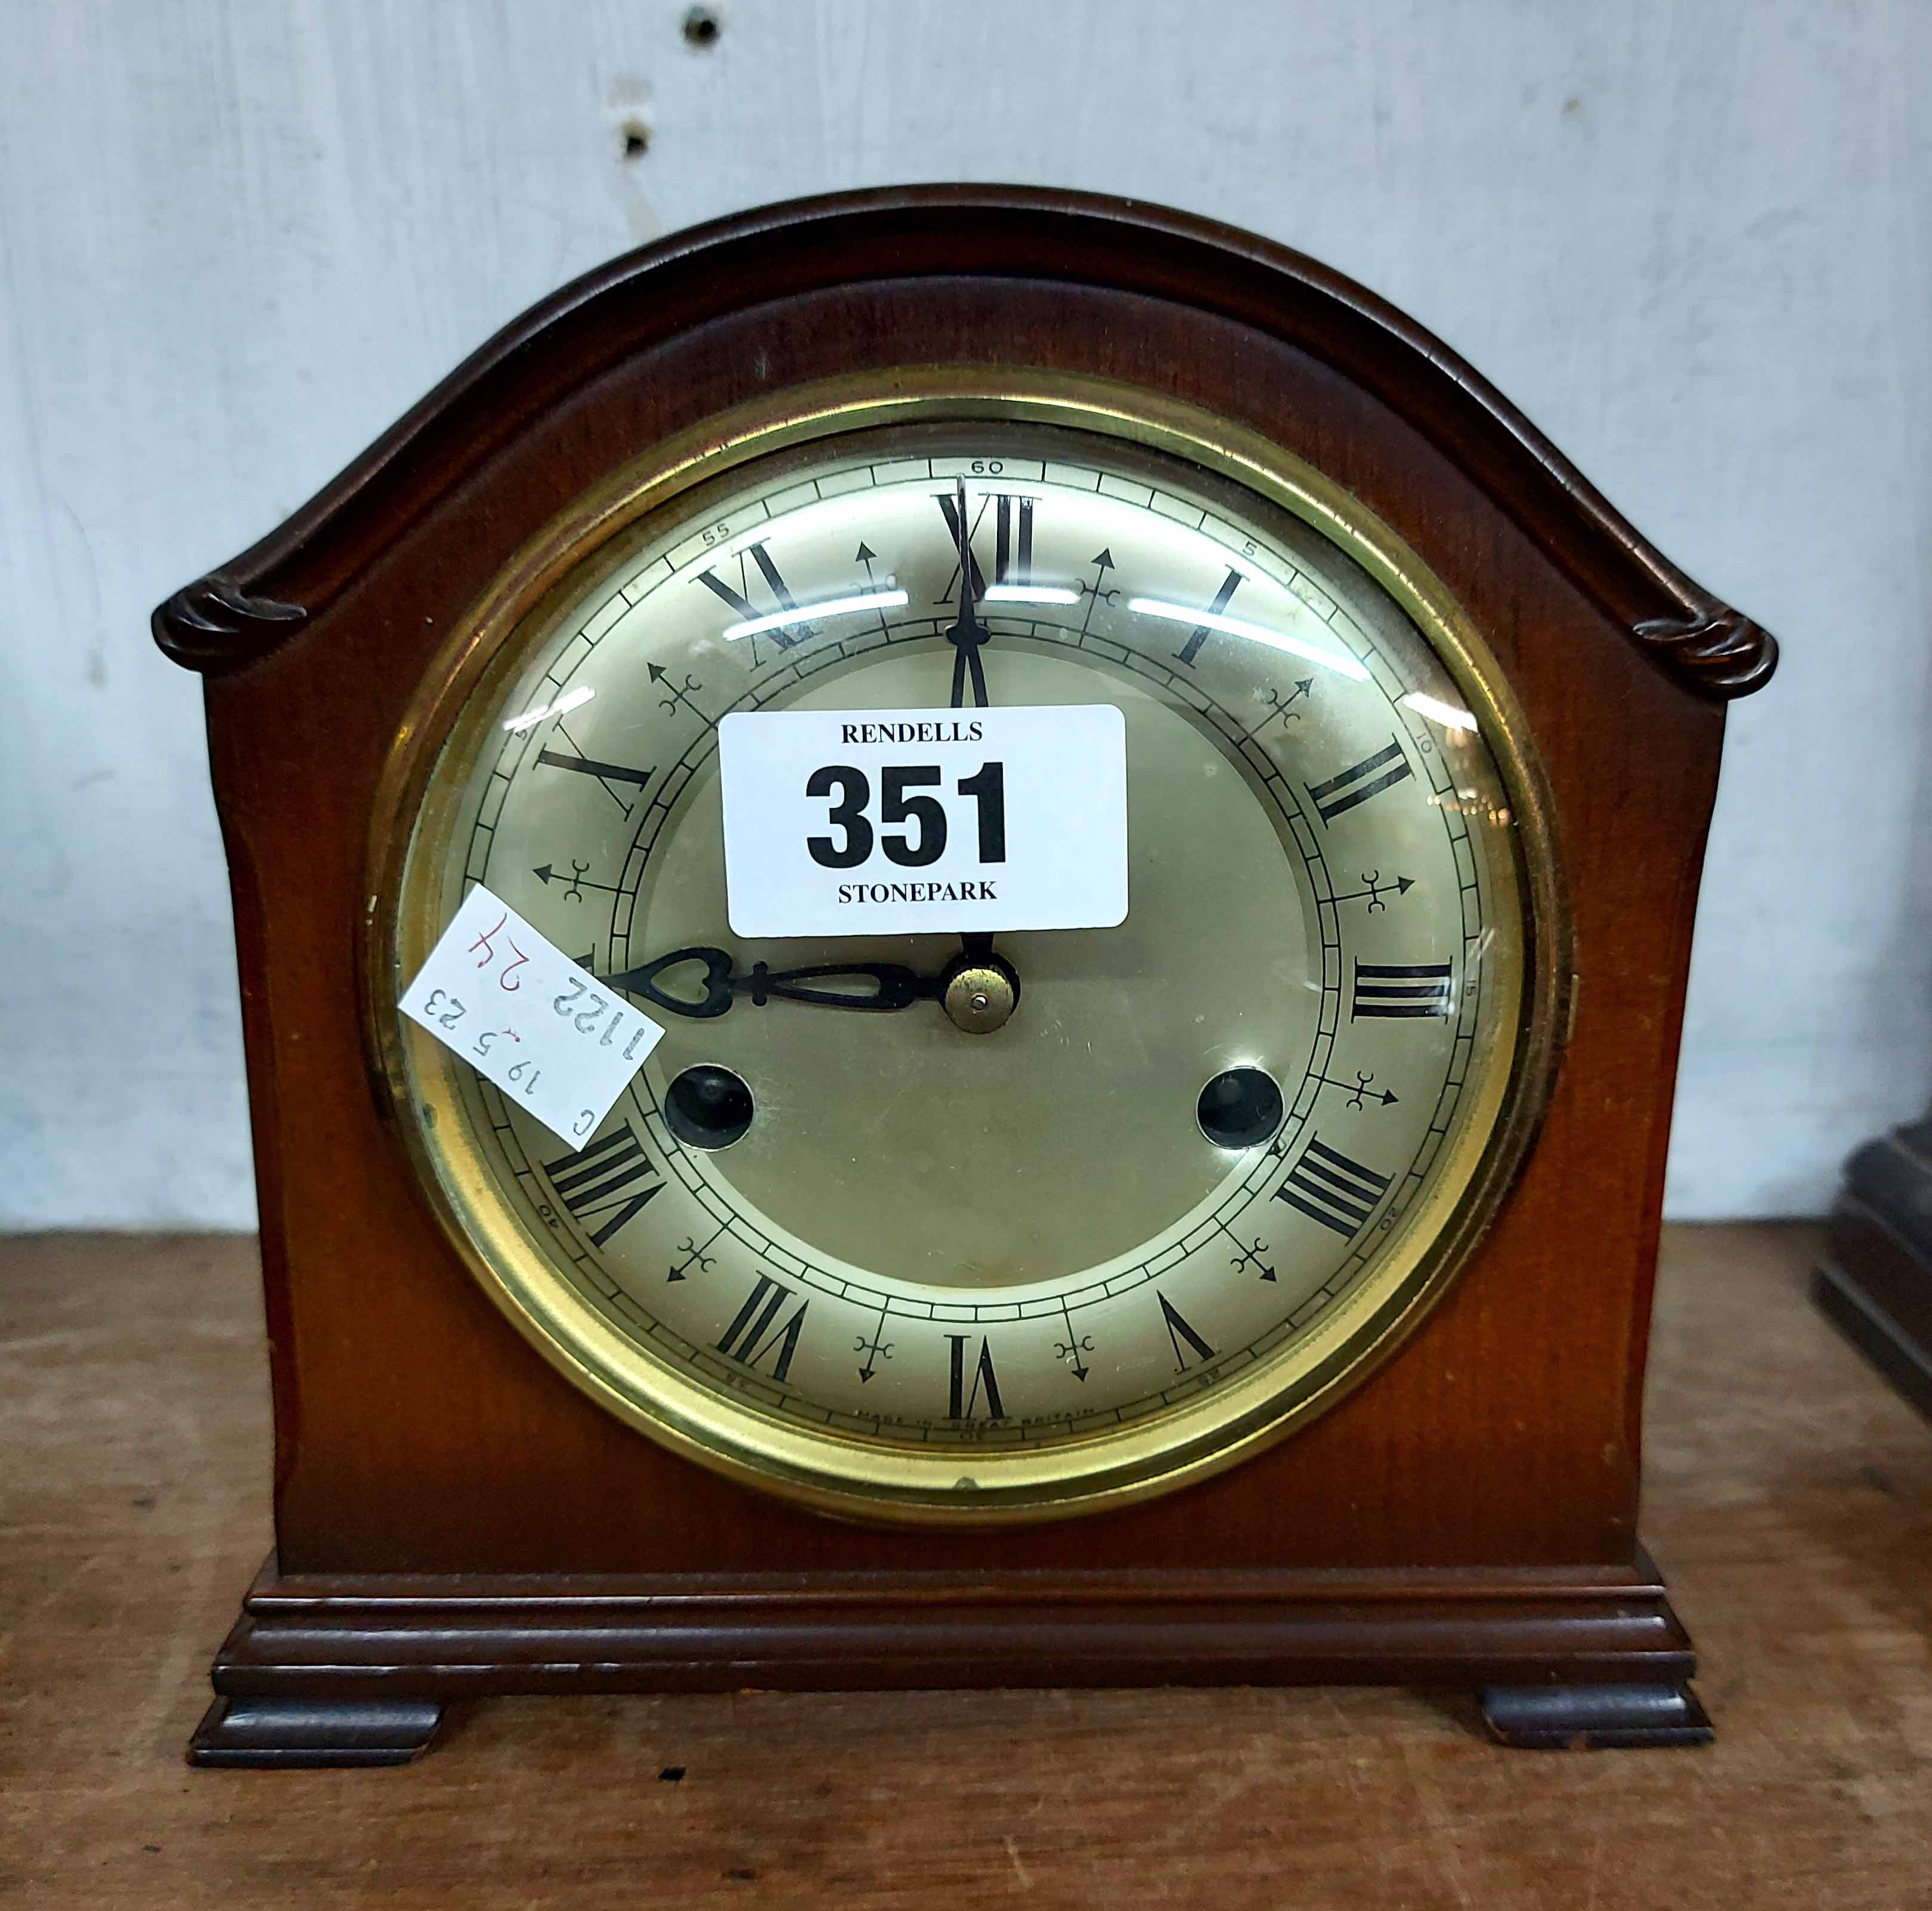 A vintage Smiths polished walnut cased mantel clock with eight day gong striking movement - Image 2 of 2